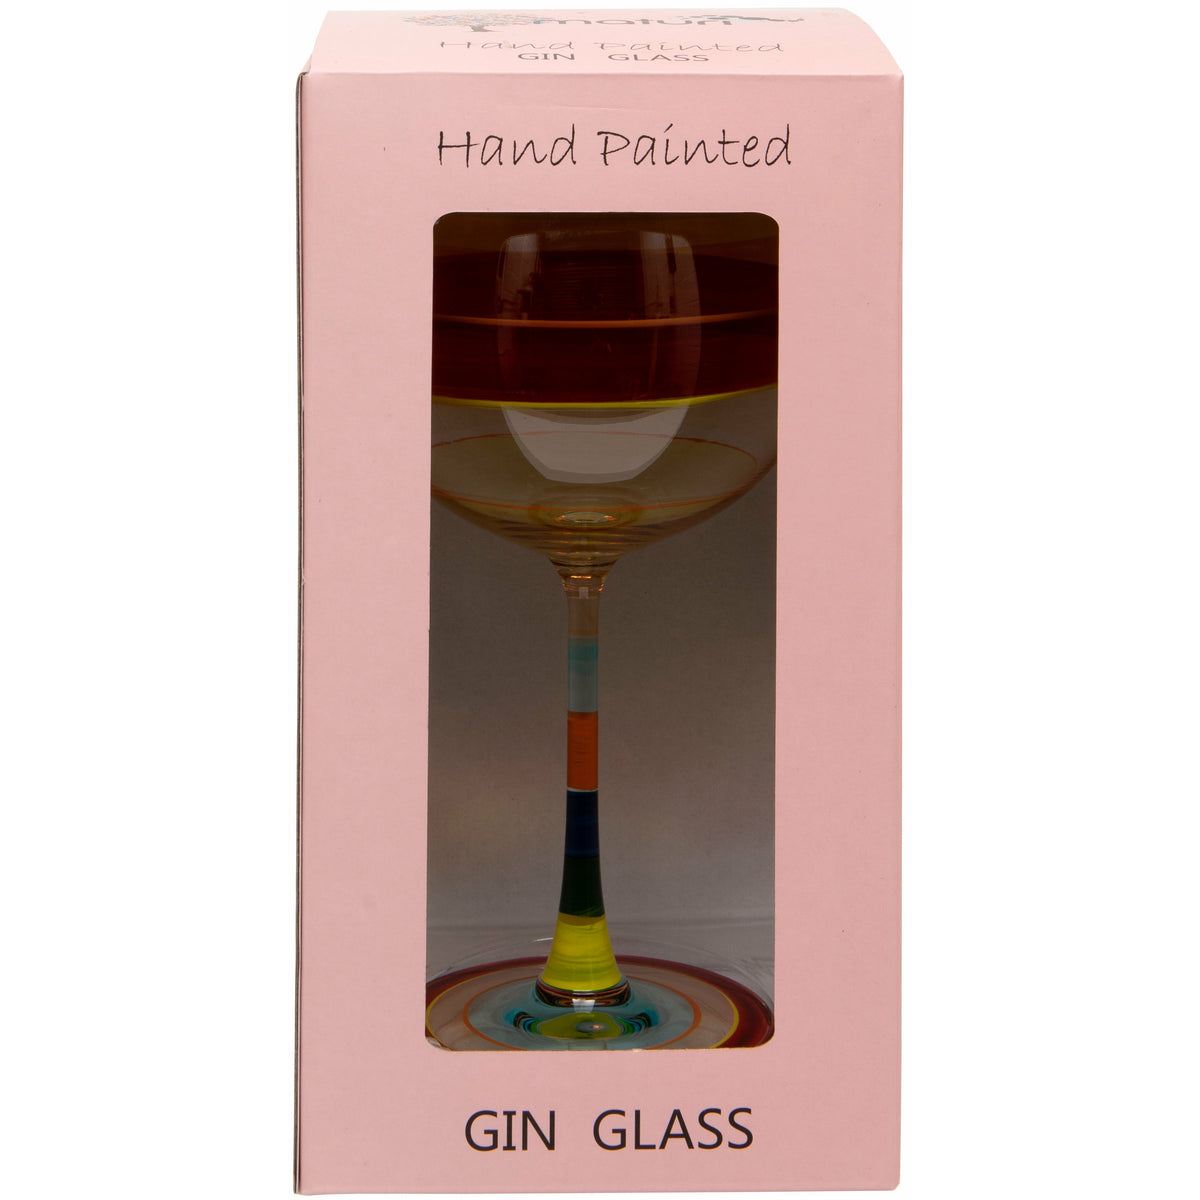 Hand Painted Light Stripe Gin Glass in Box